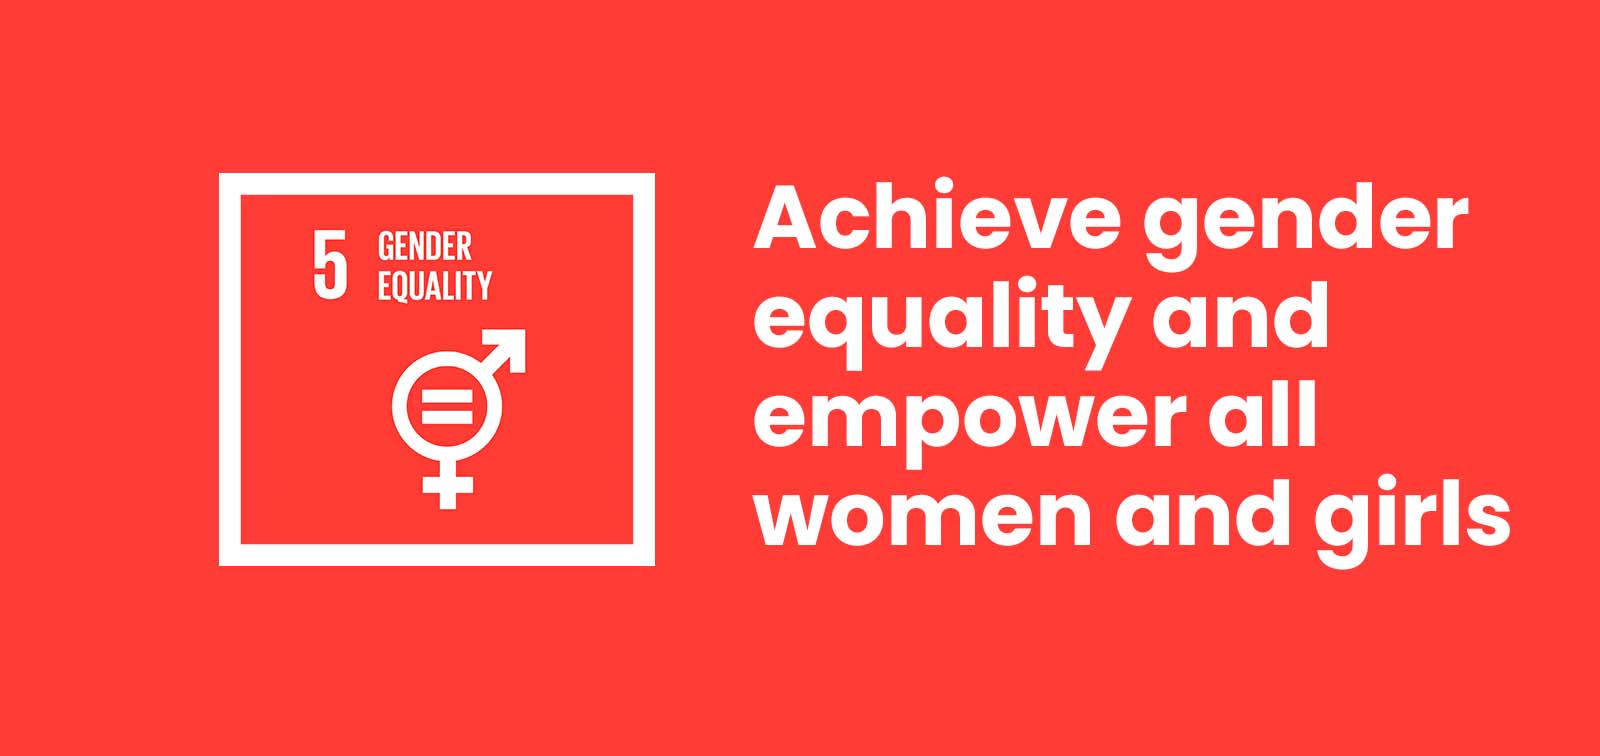 Goal 5: Achieve gender equality and empower all women and girls - ISGLOBAL